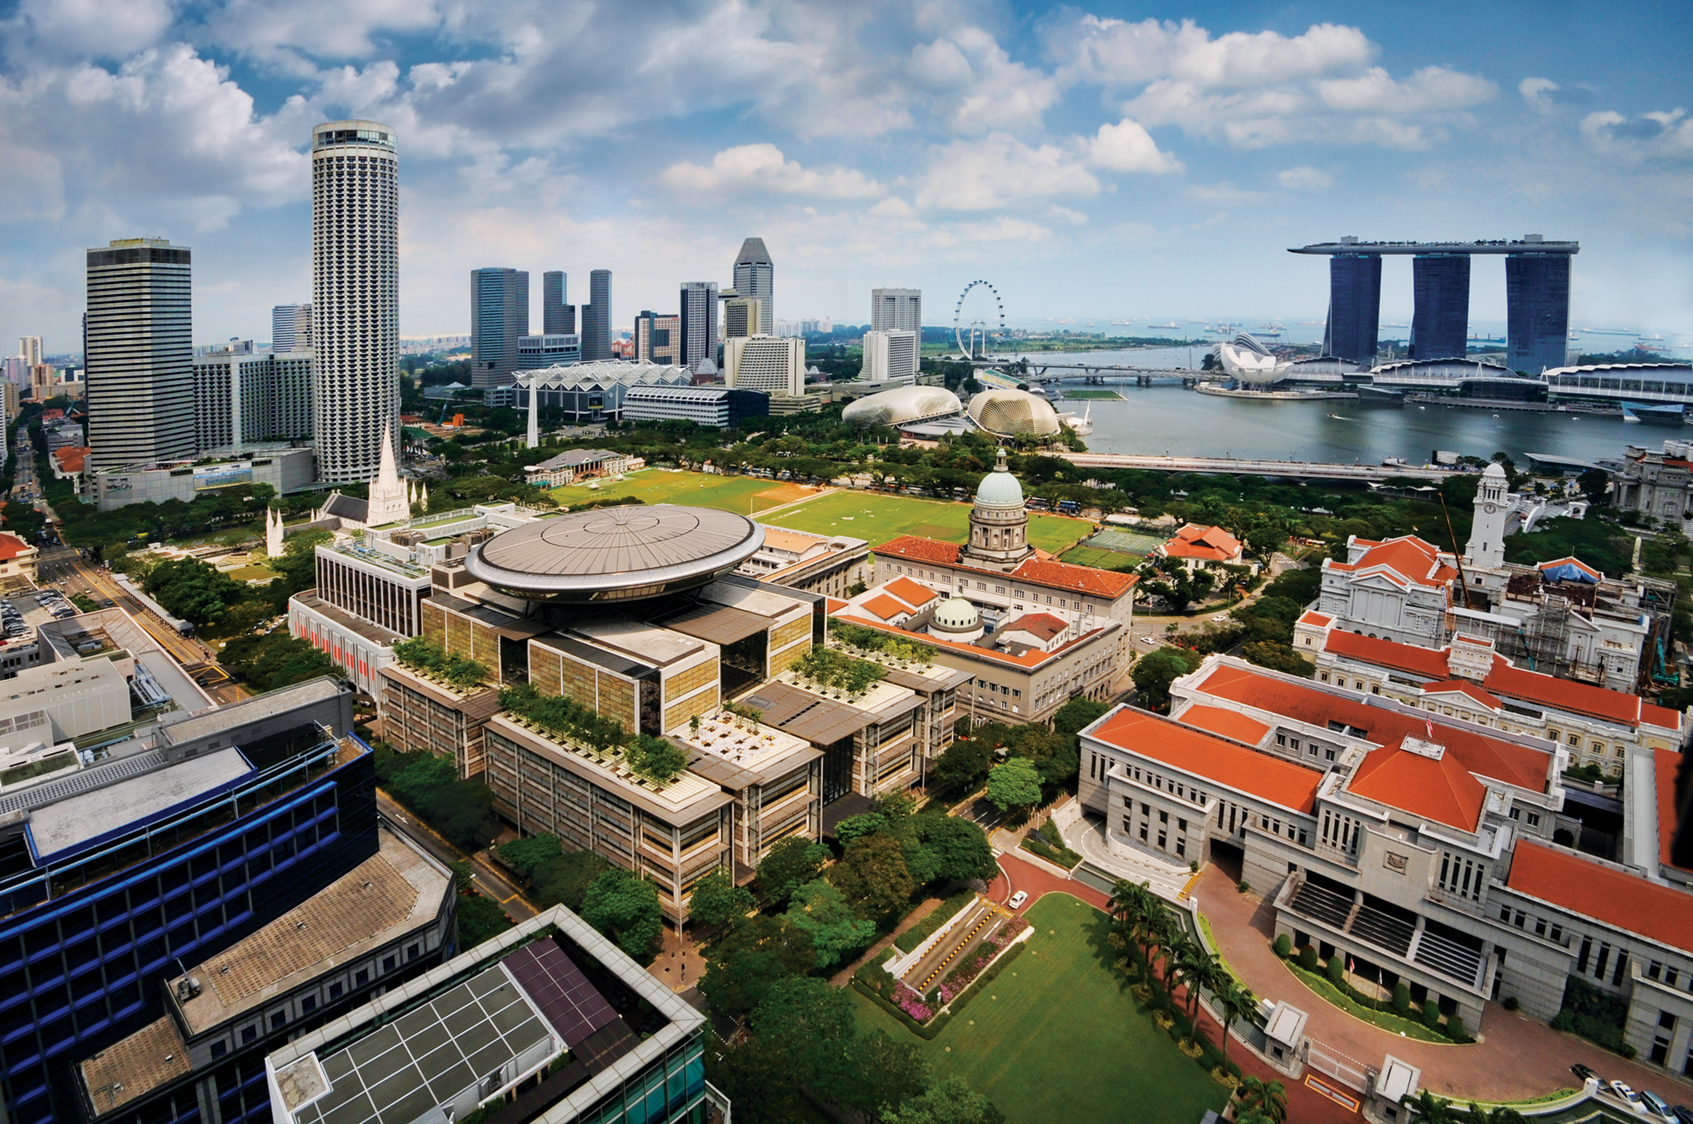 Singapore showing the Marina Bay Sands, cruise area, and Central Business District